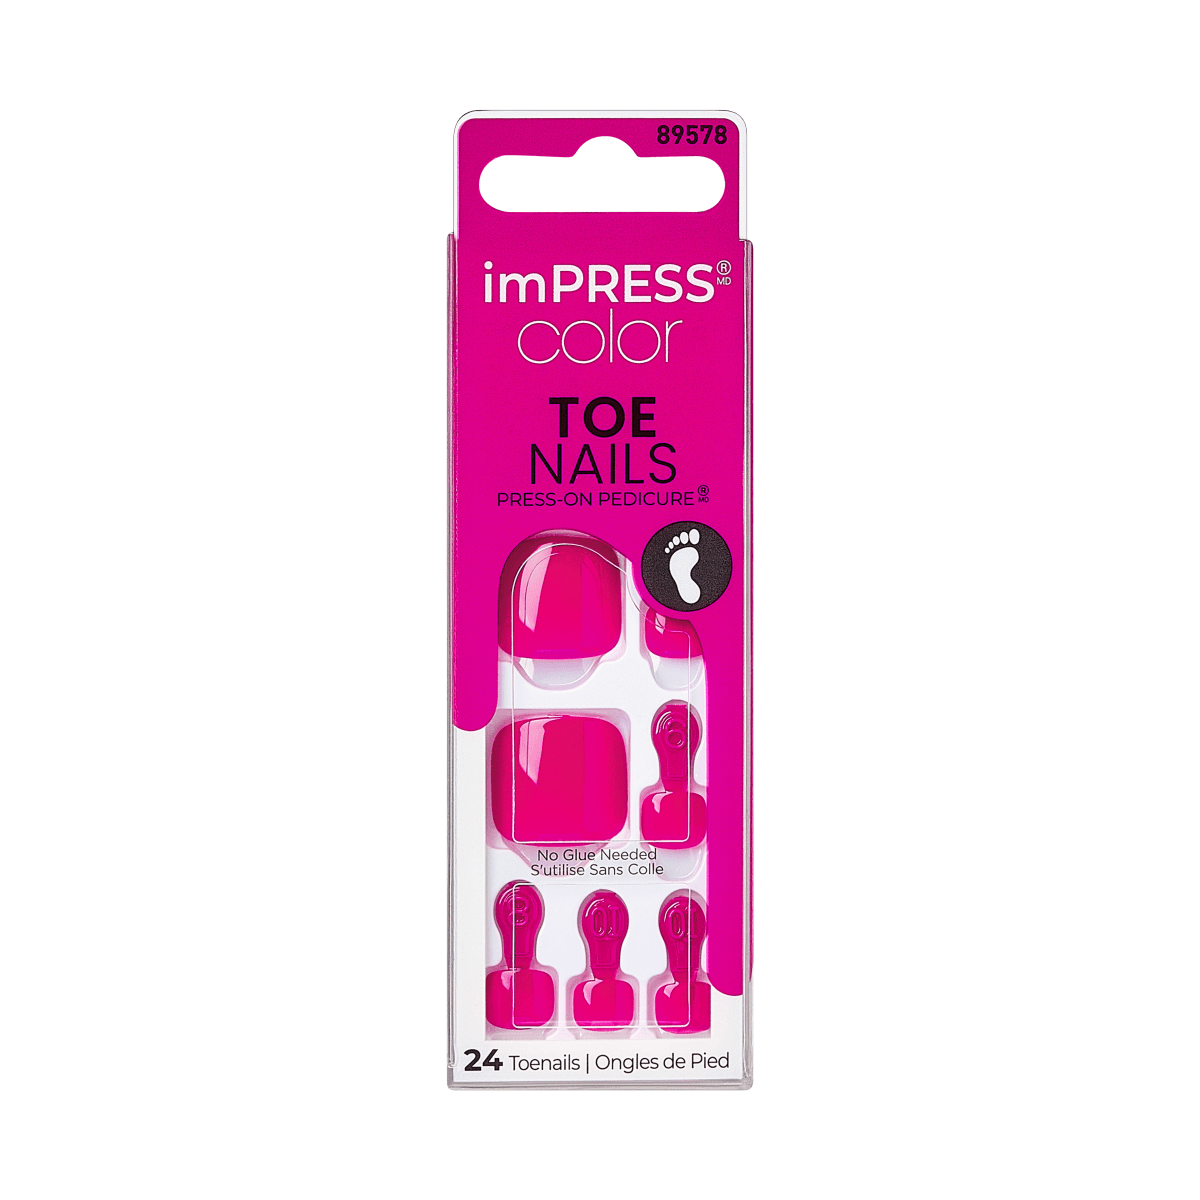 imPRESS Color Press-On Pedicure - Almost There